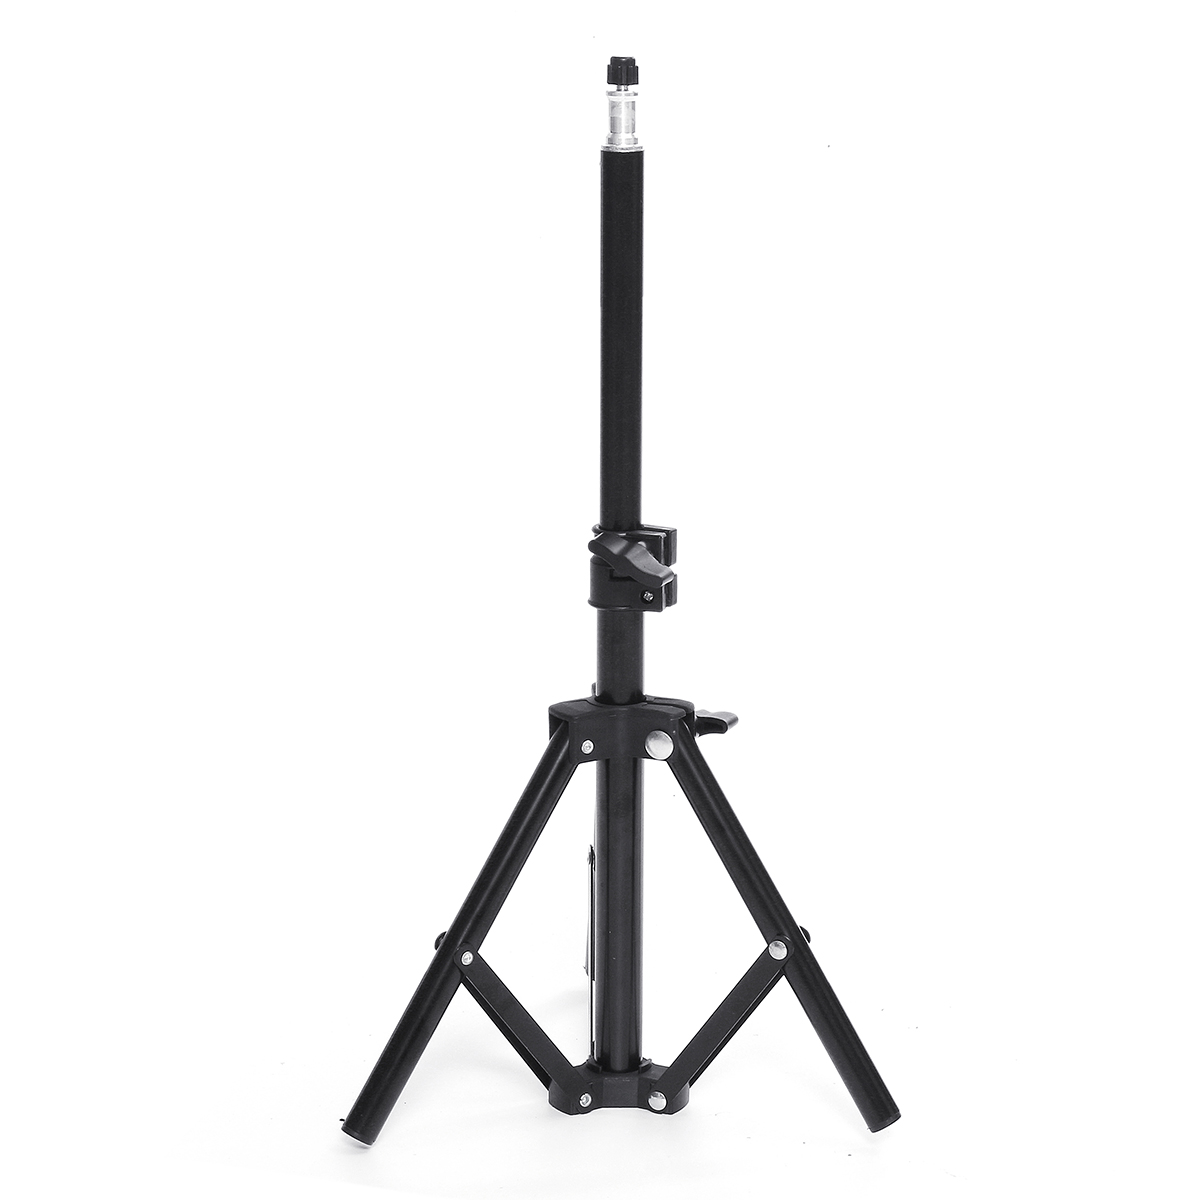 50160cm-Foldable-Portable-Camera-Tripod-Video-Ring-Light-Flash-Stand-Phone-Holder-For-Live-Stream-Ma-1627474-3